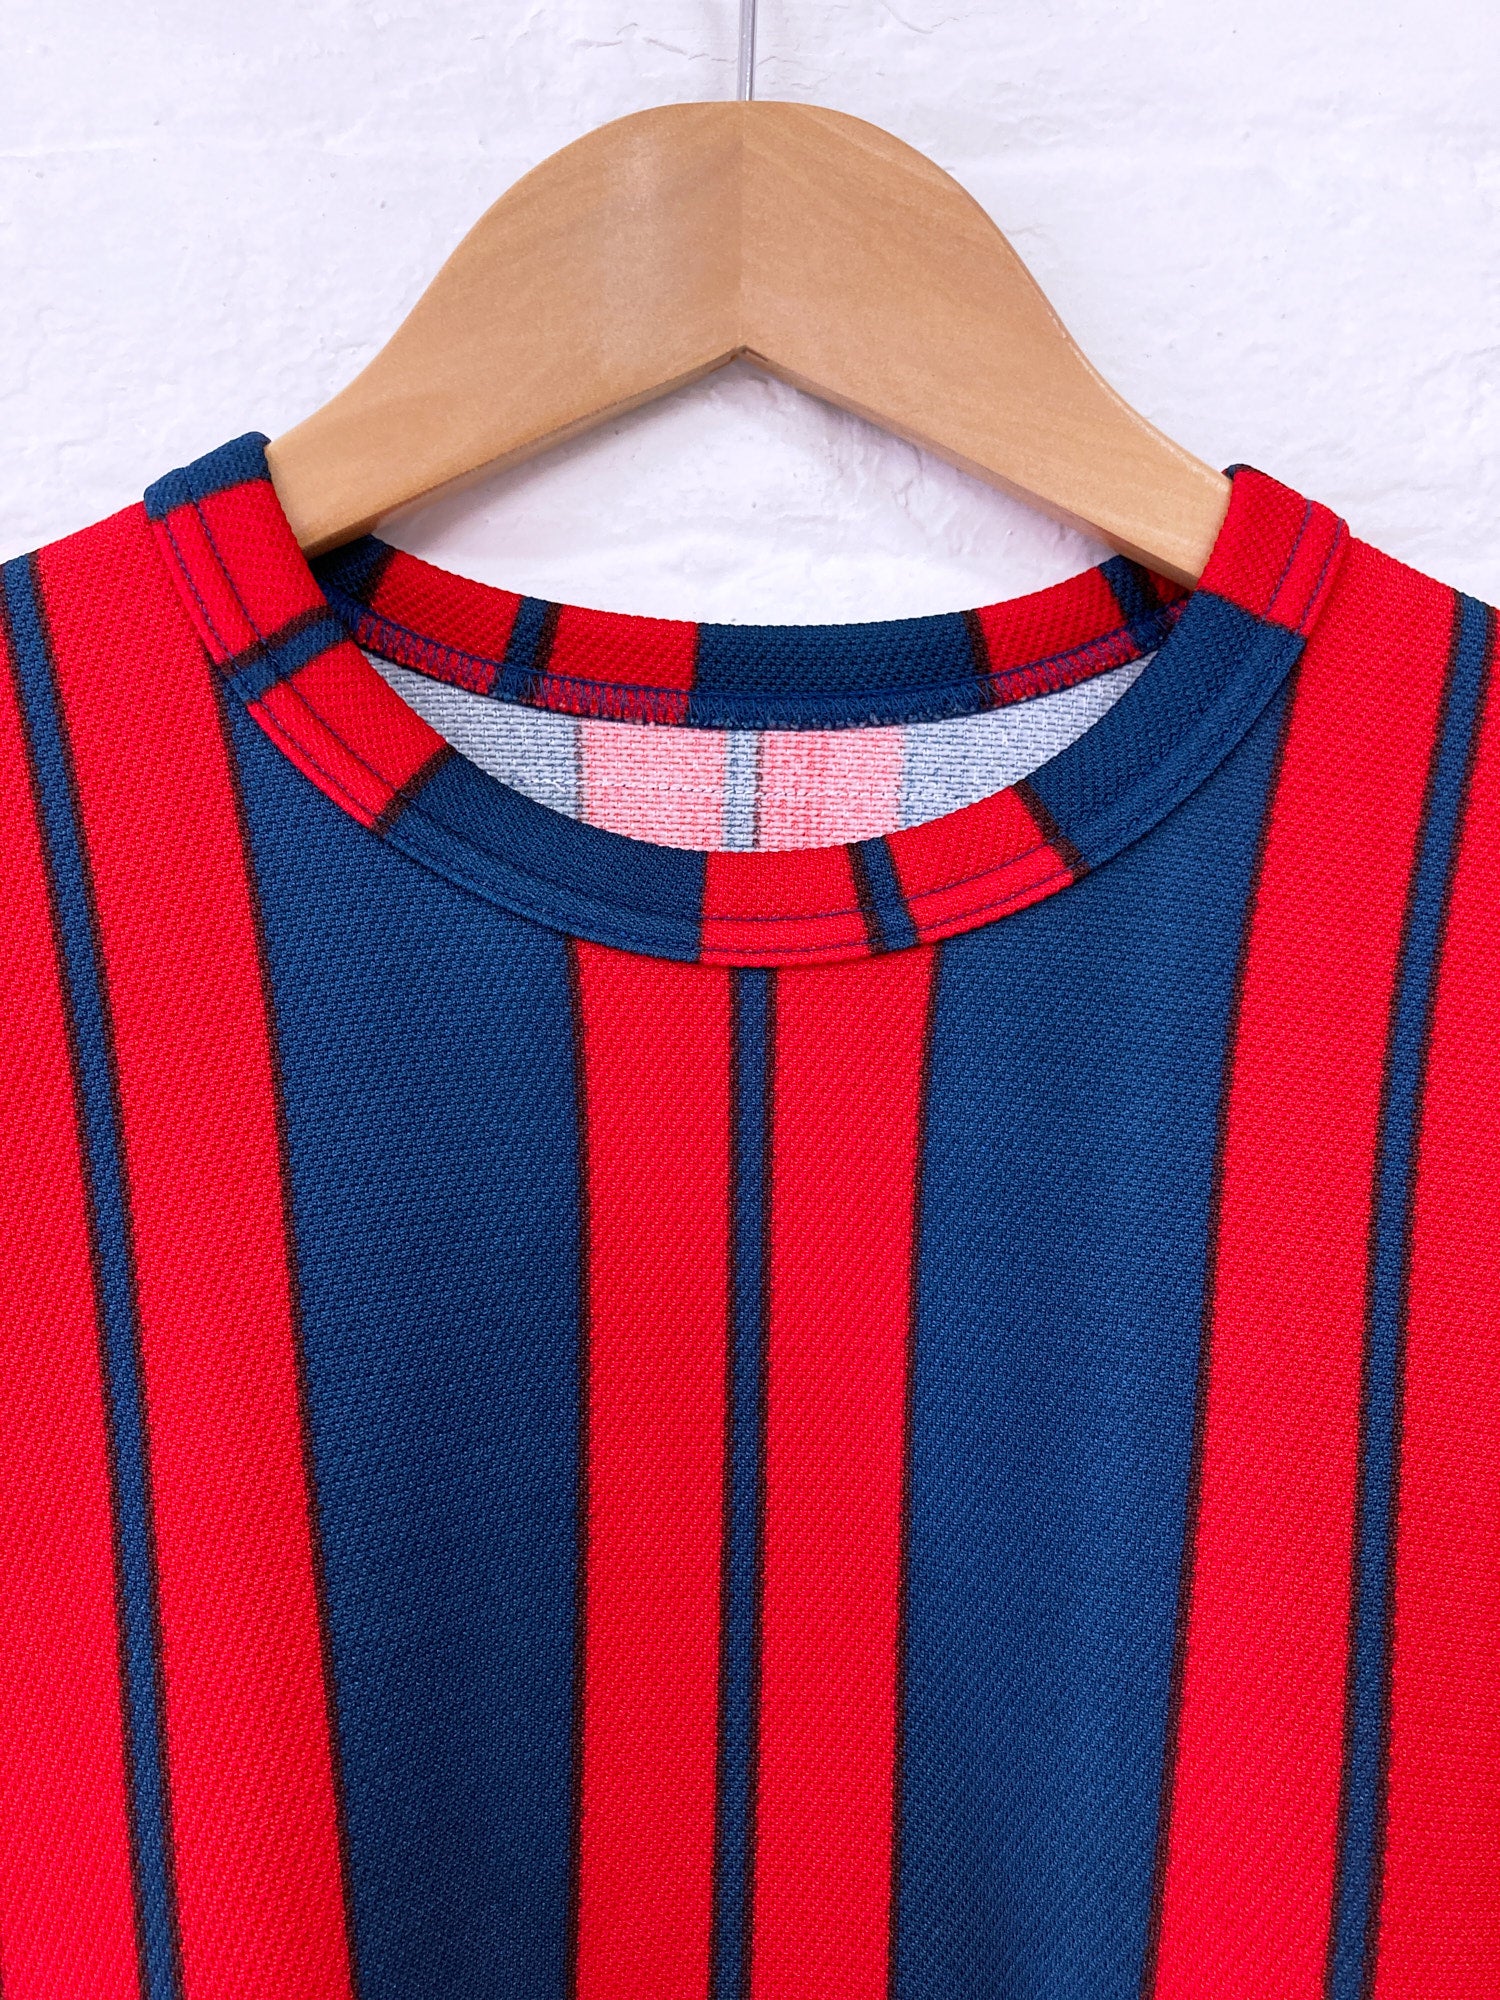 Comme des Garcons Homme 2000 blue and red striped polyester long sleeve top - S